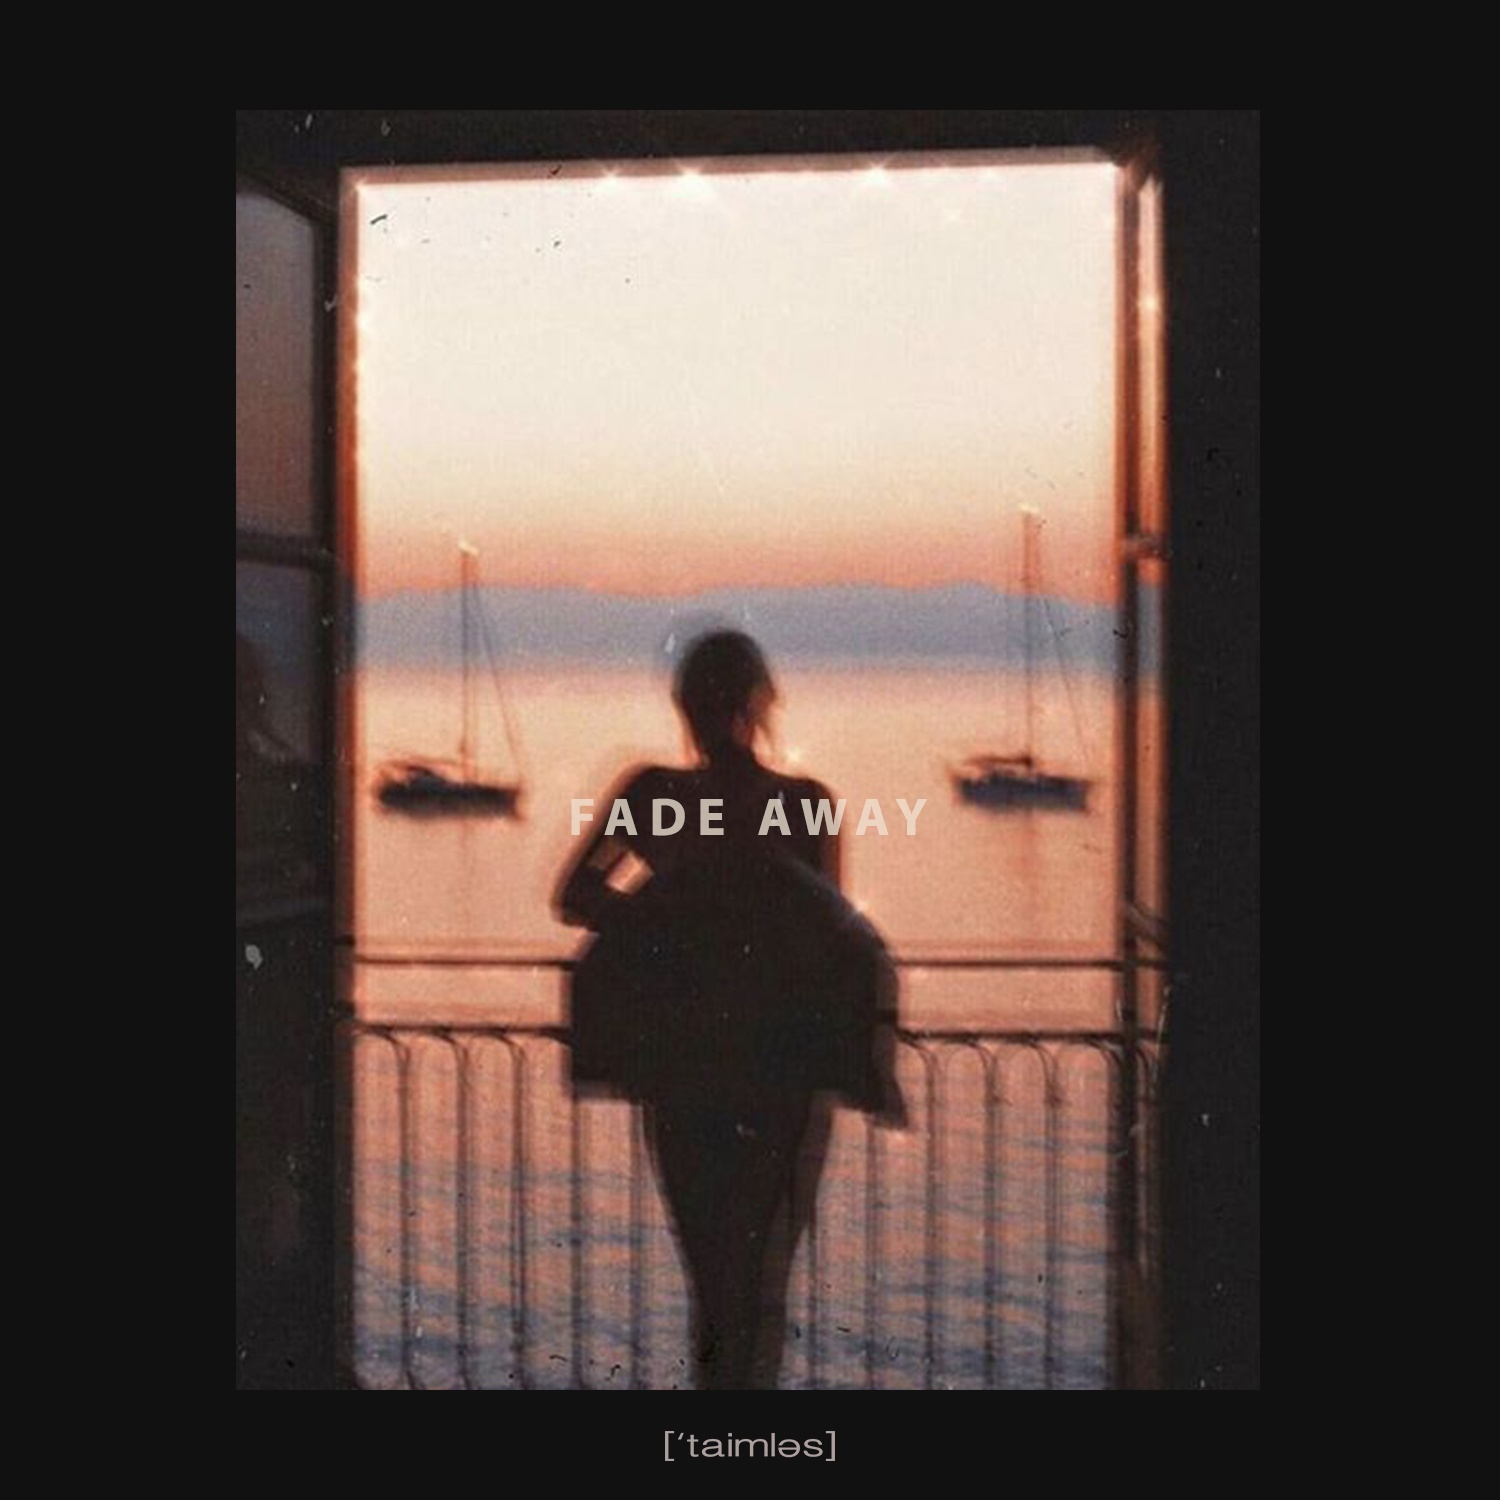 Listen to "FADE AWAY", the new EP by Taimles